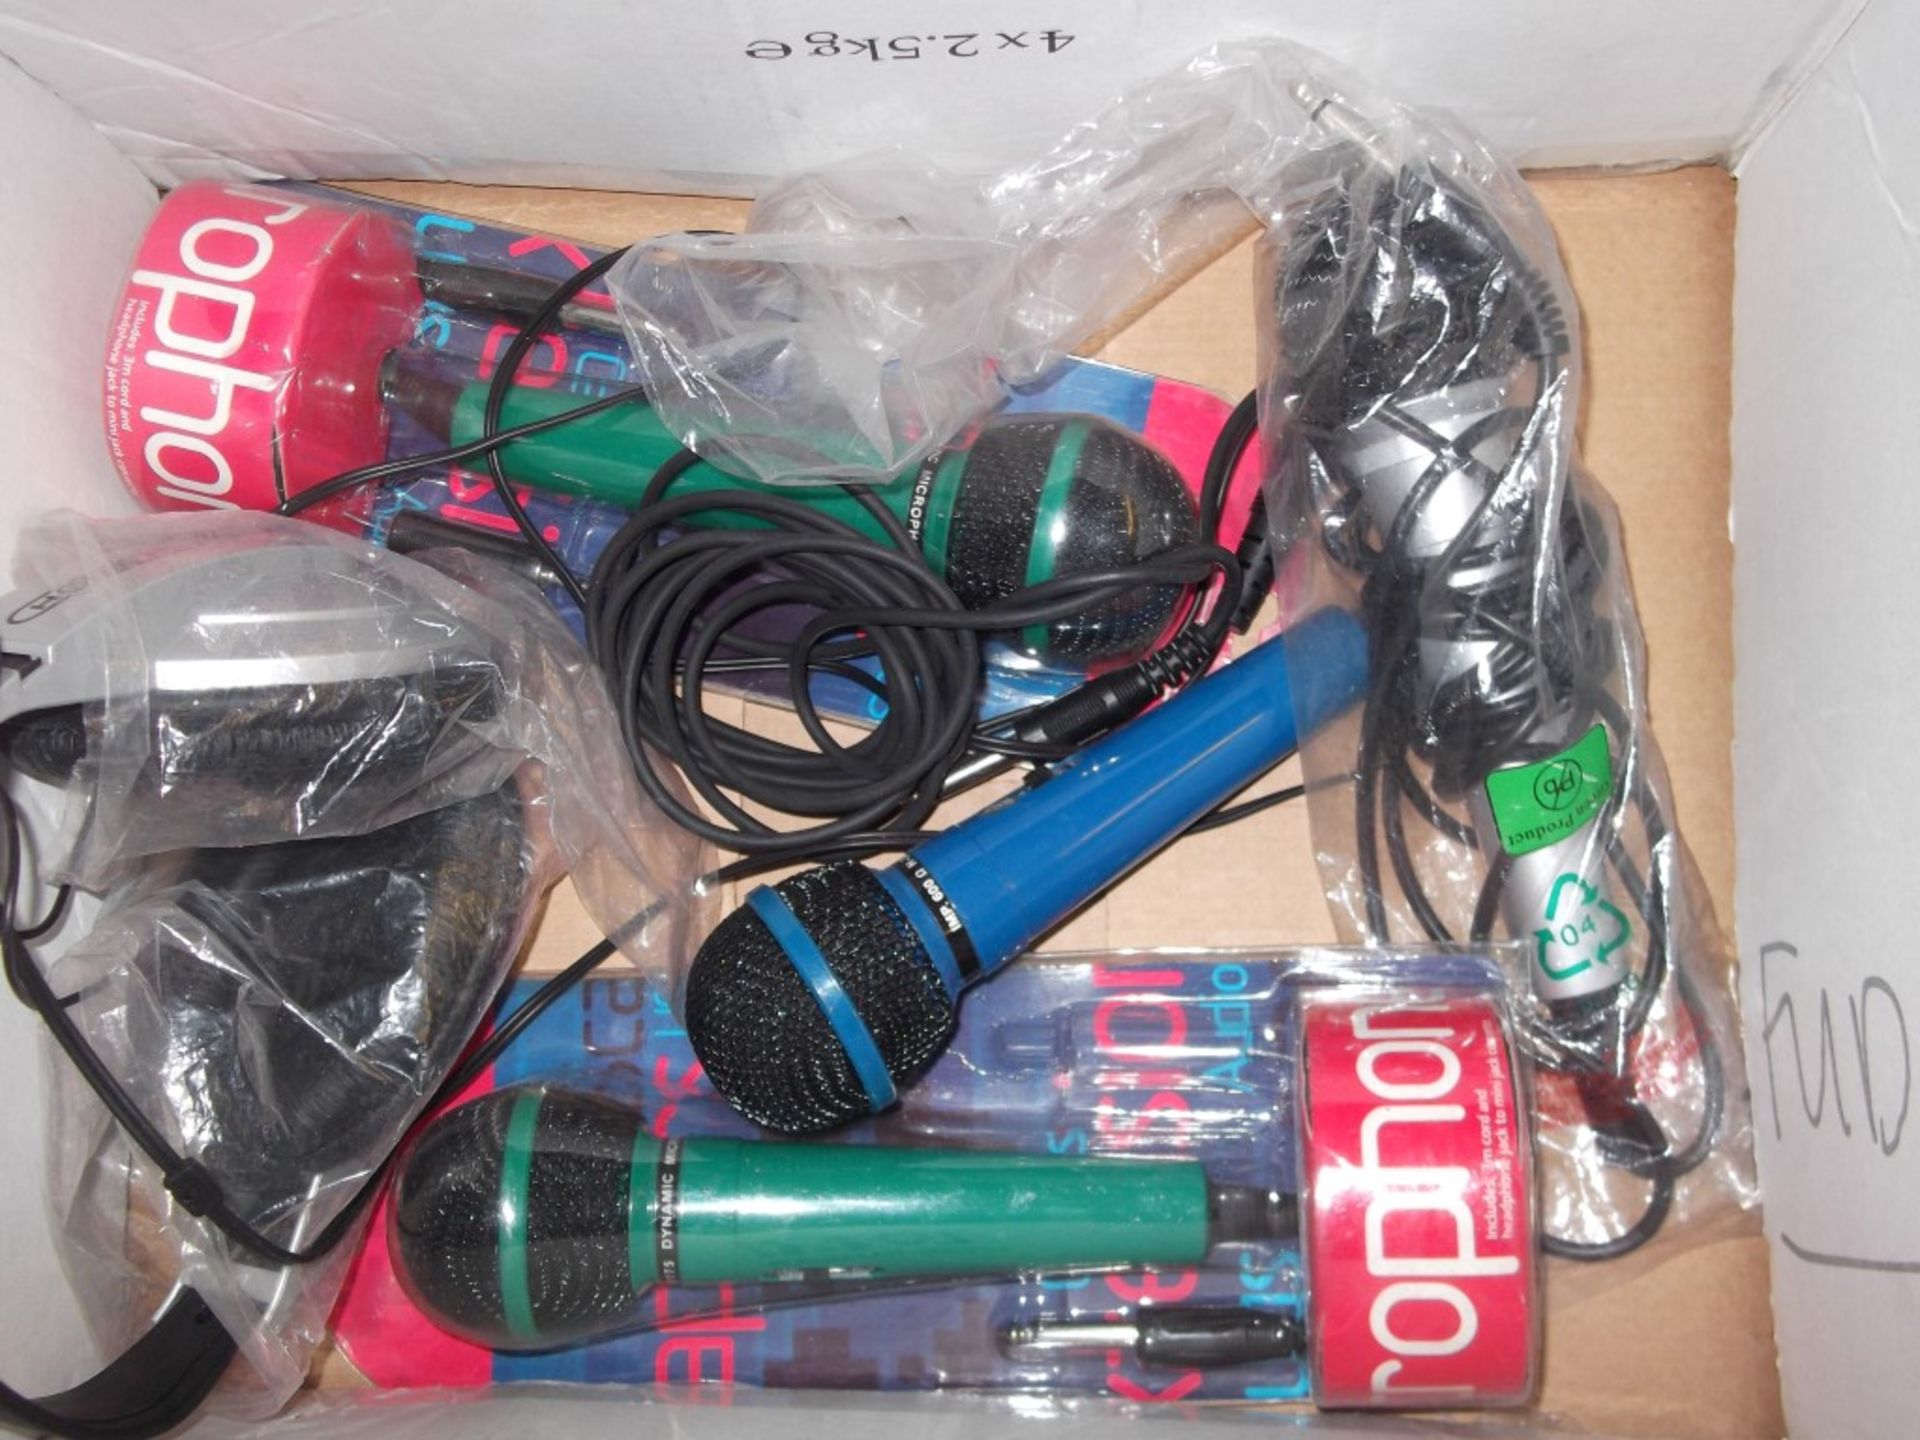 1 x Box Of Assorted Sound Equipment - Includes Professional Microphones, Tape Deck, Mixed Audio - Image 2 of 4